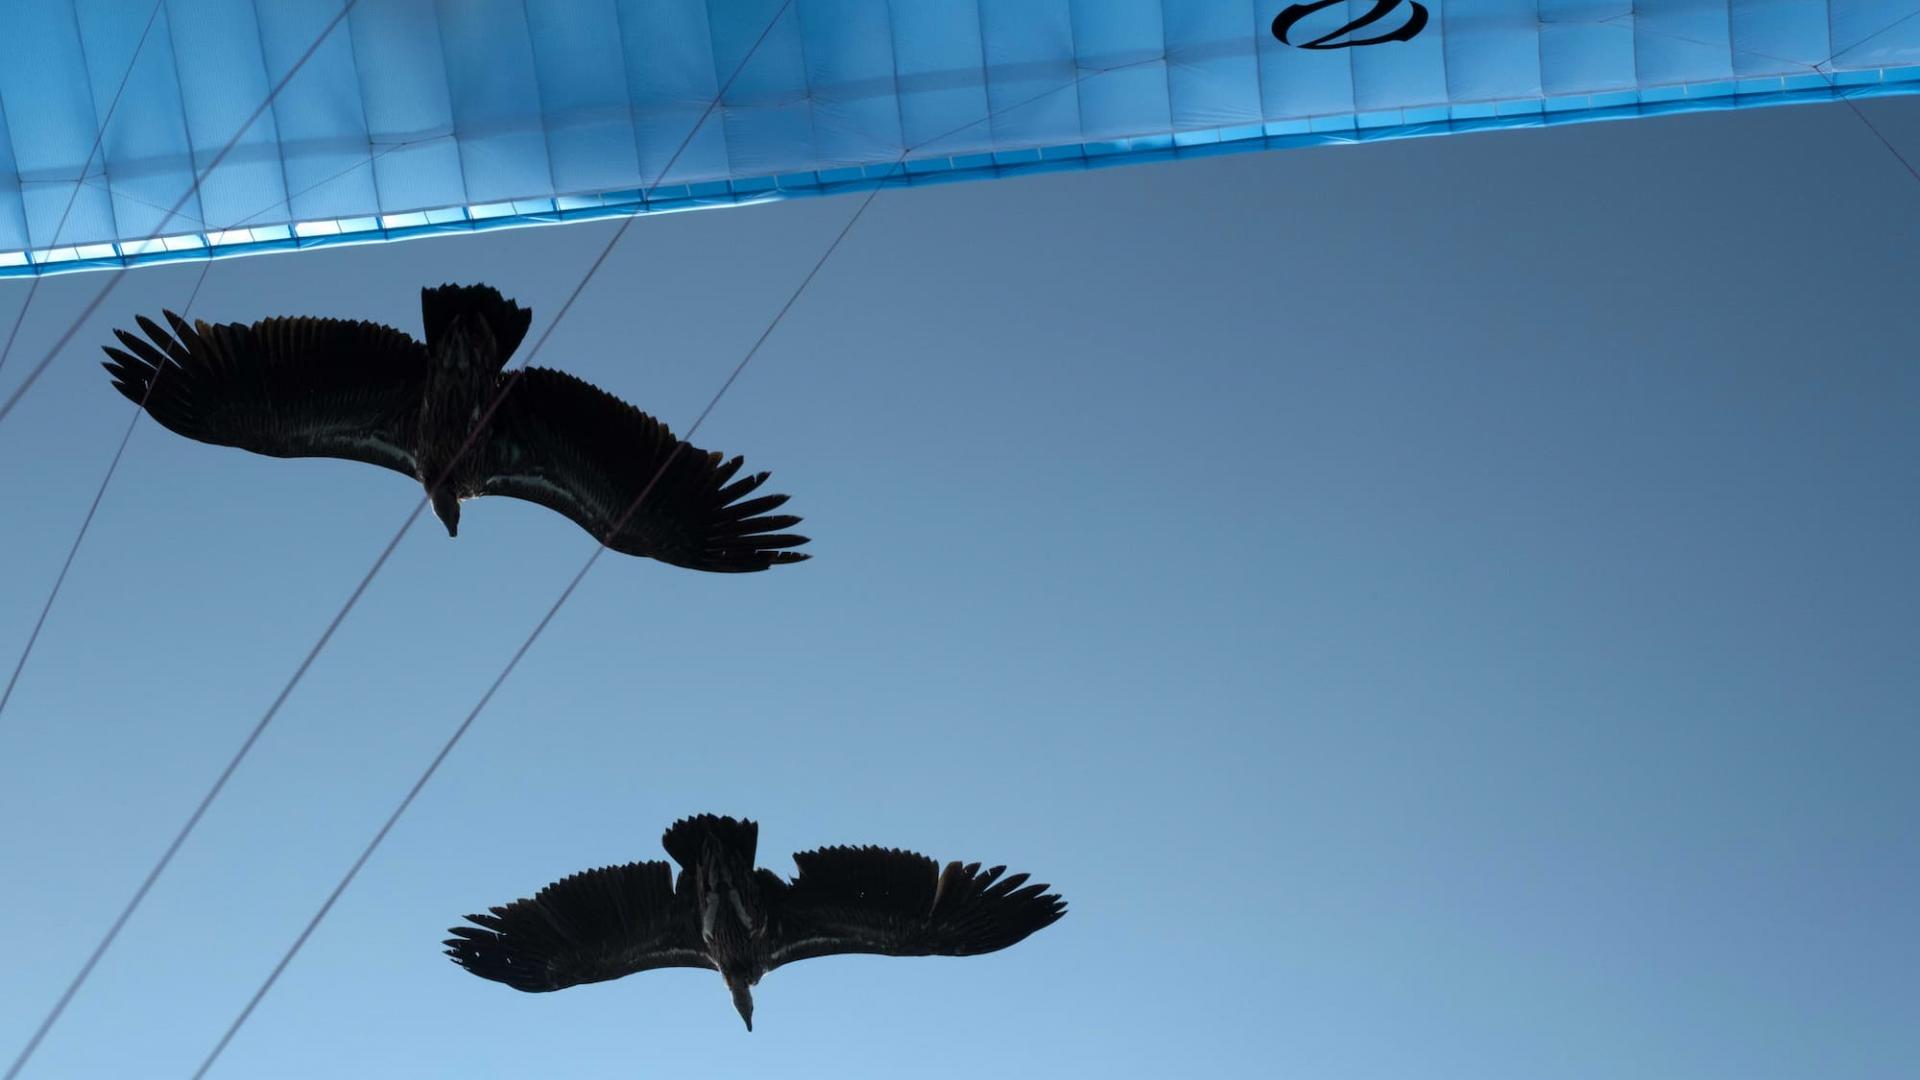 two himalayan vultures fly over the leading edge of a paraglide